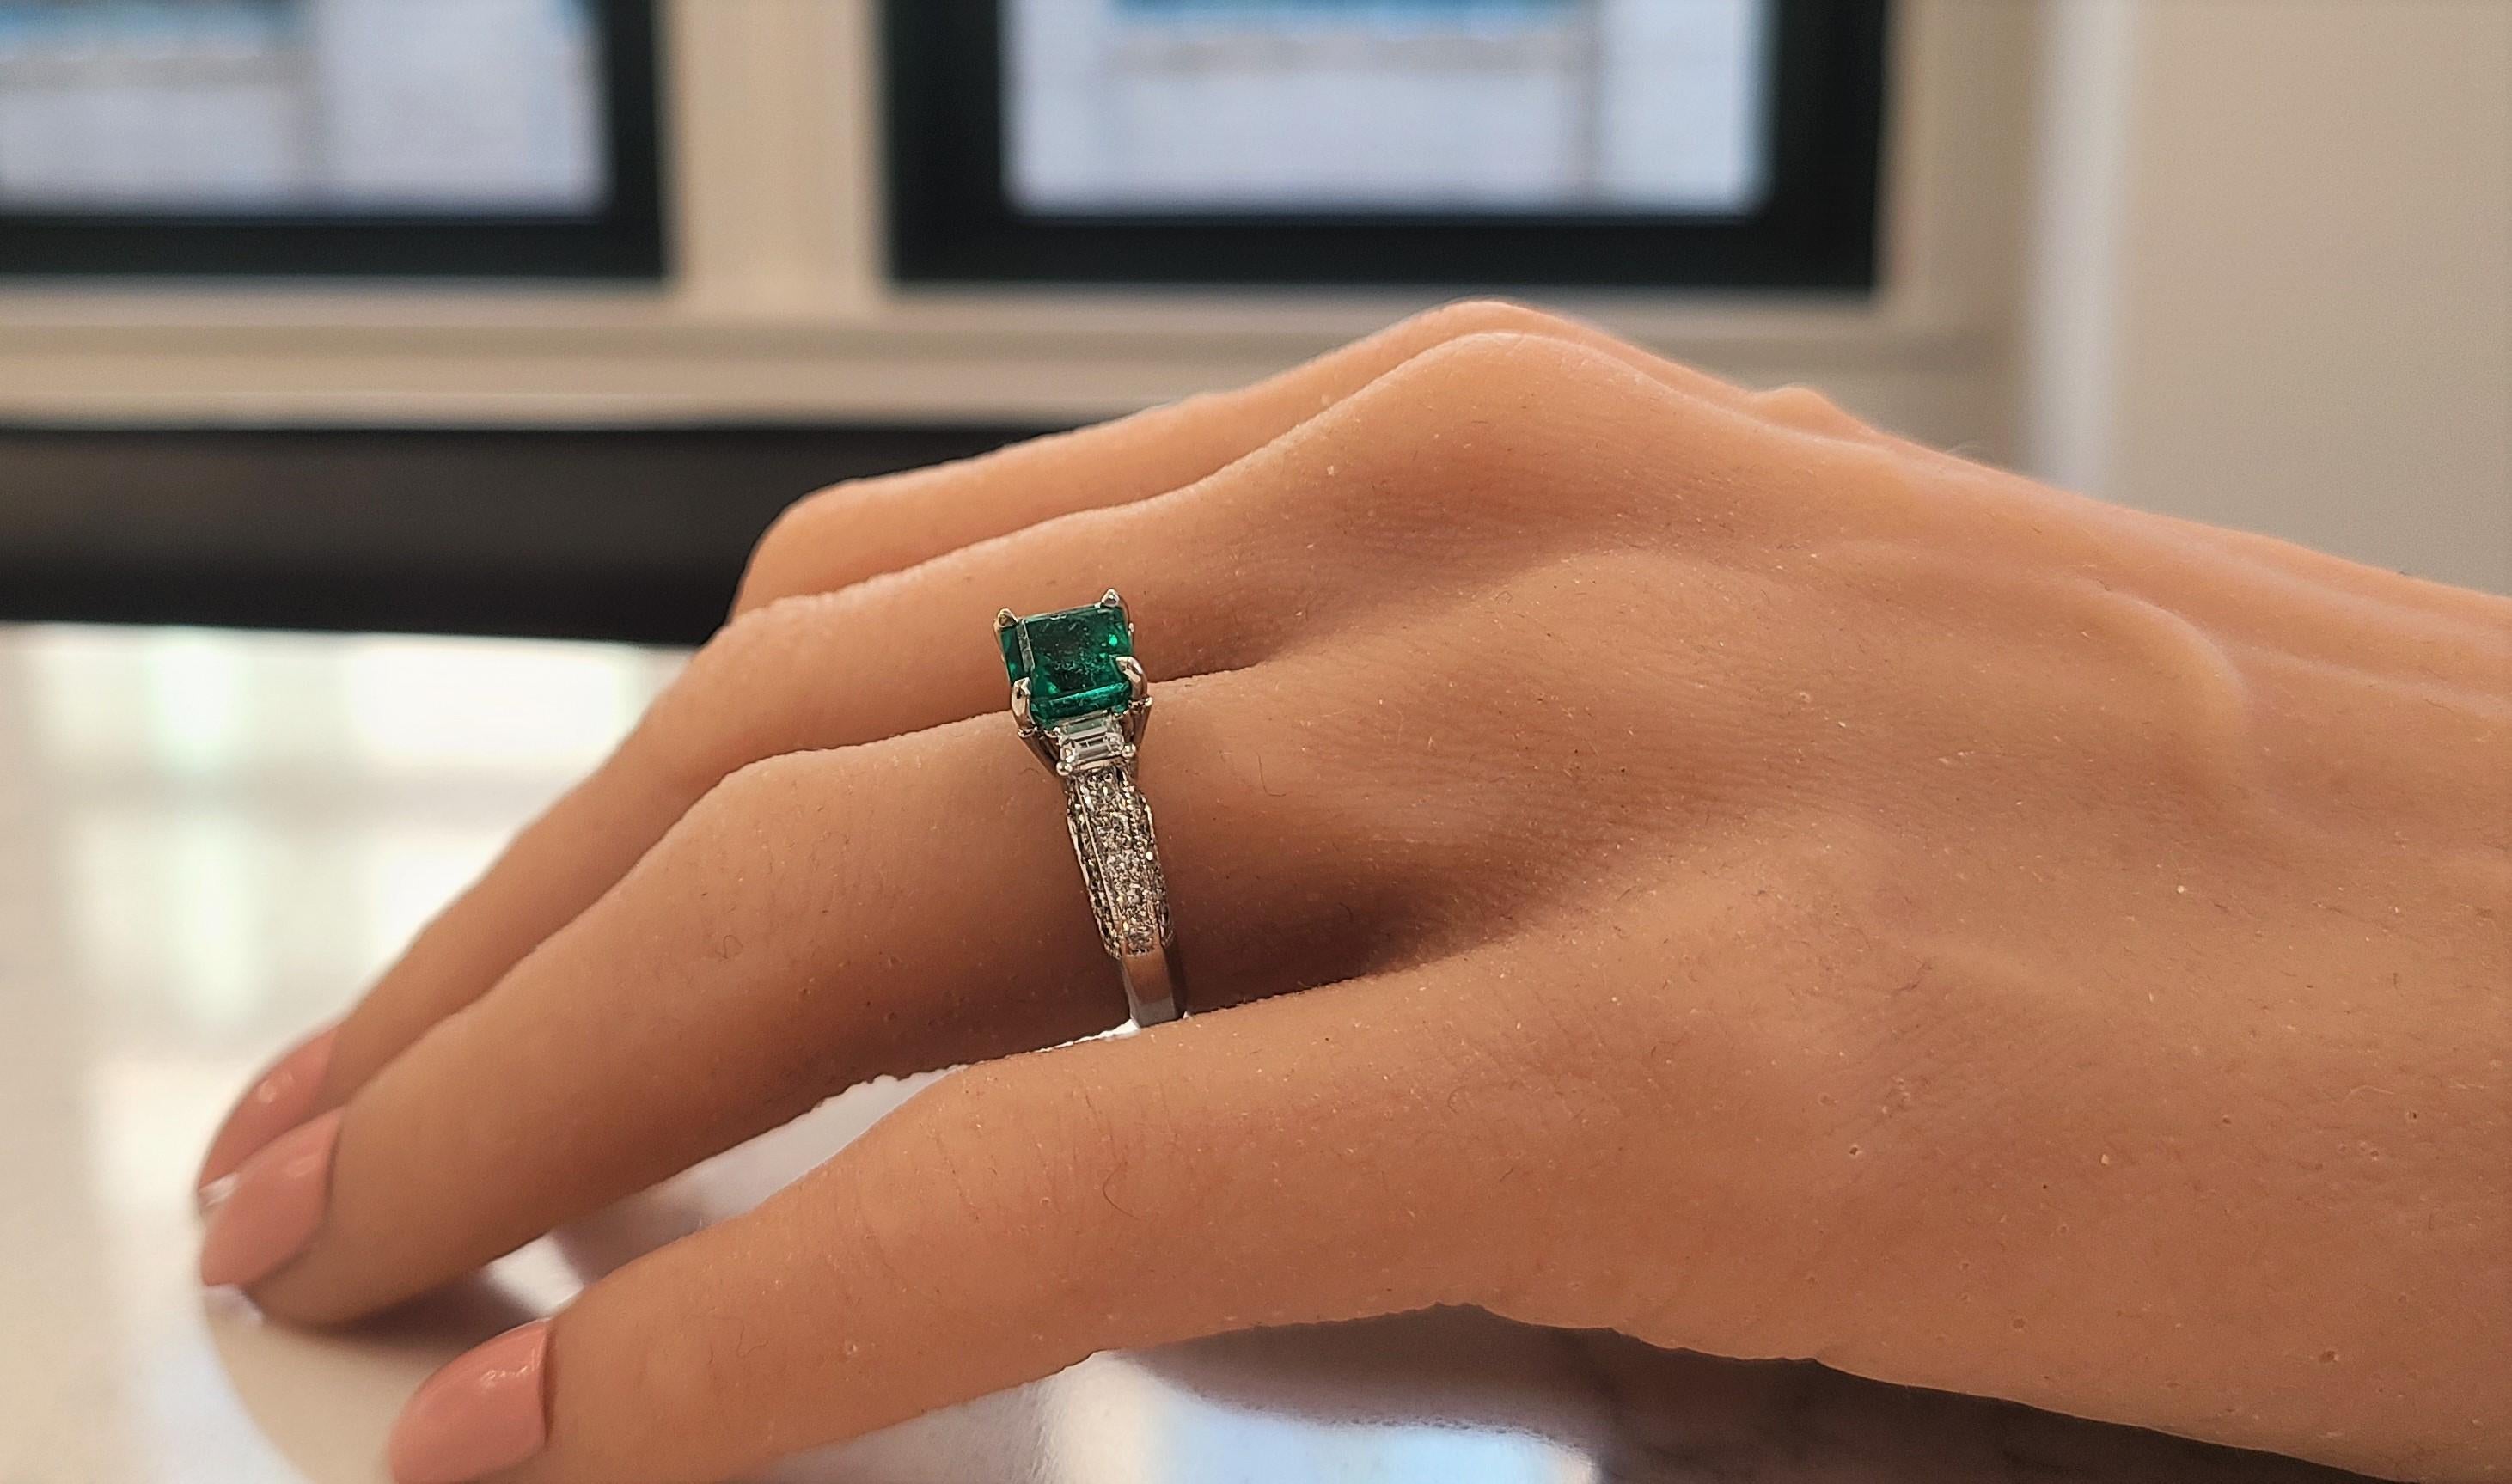 Celebrate your next anniversary or engagement moment with this vintage style, brightly polished 14k white gold emerald and diamond ring. A fine quality 1.85 carat square emerald cut emerald with measurements of 7.50mmx7.50mm sits in the center. The